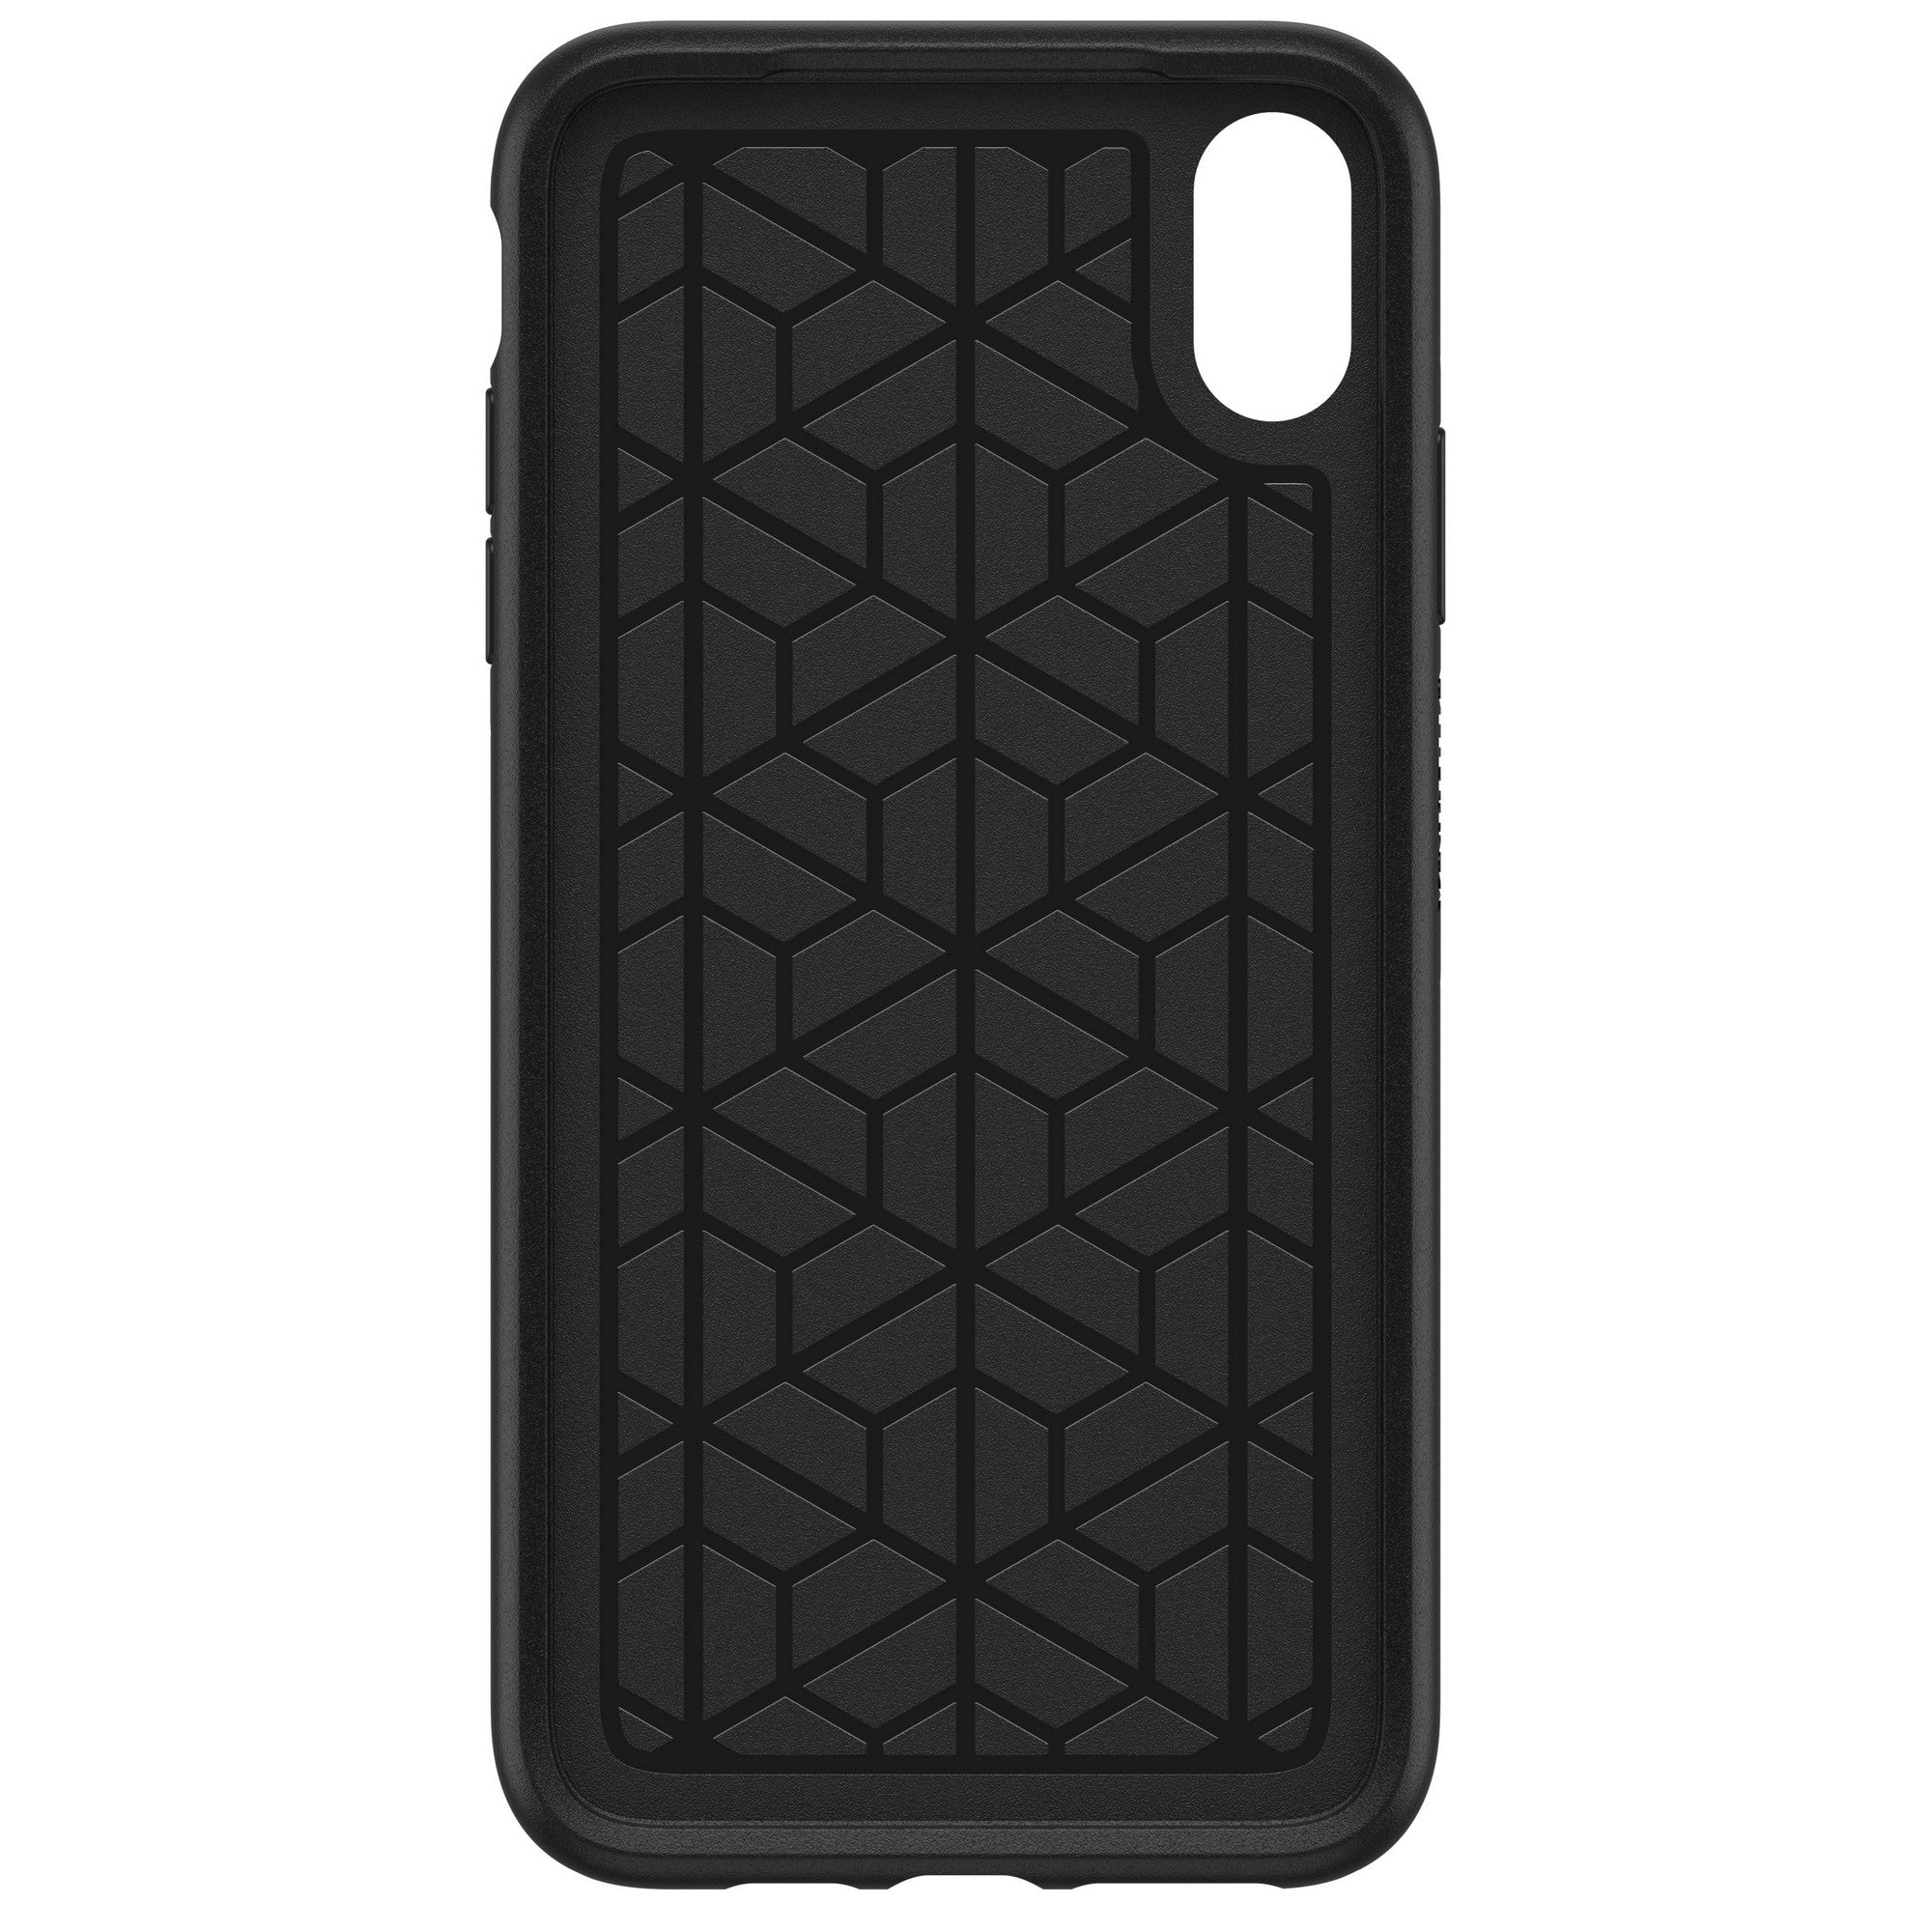 As Is - iPhone Xs Max Otterbox Black Symmetry Series case - 15-03588